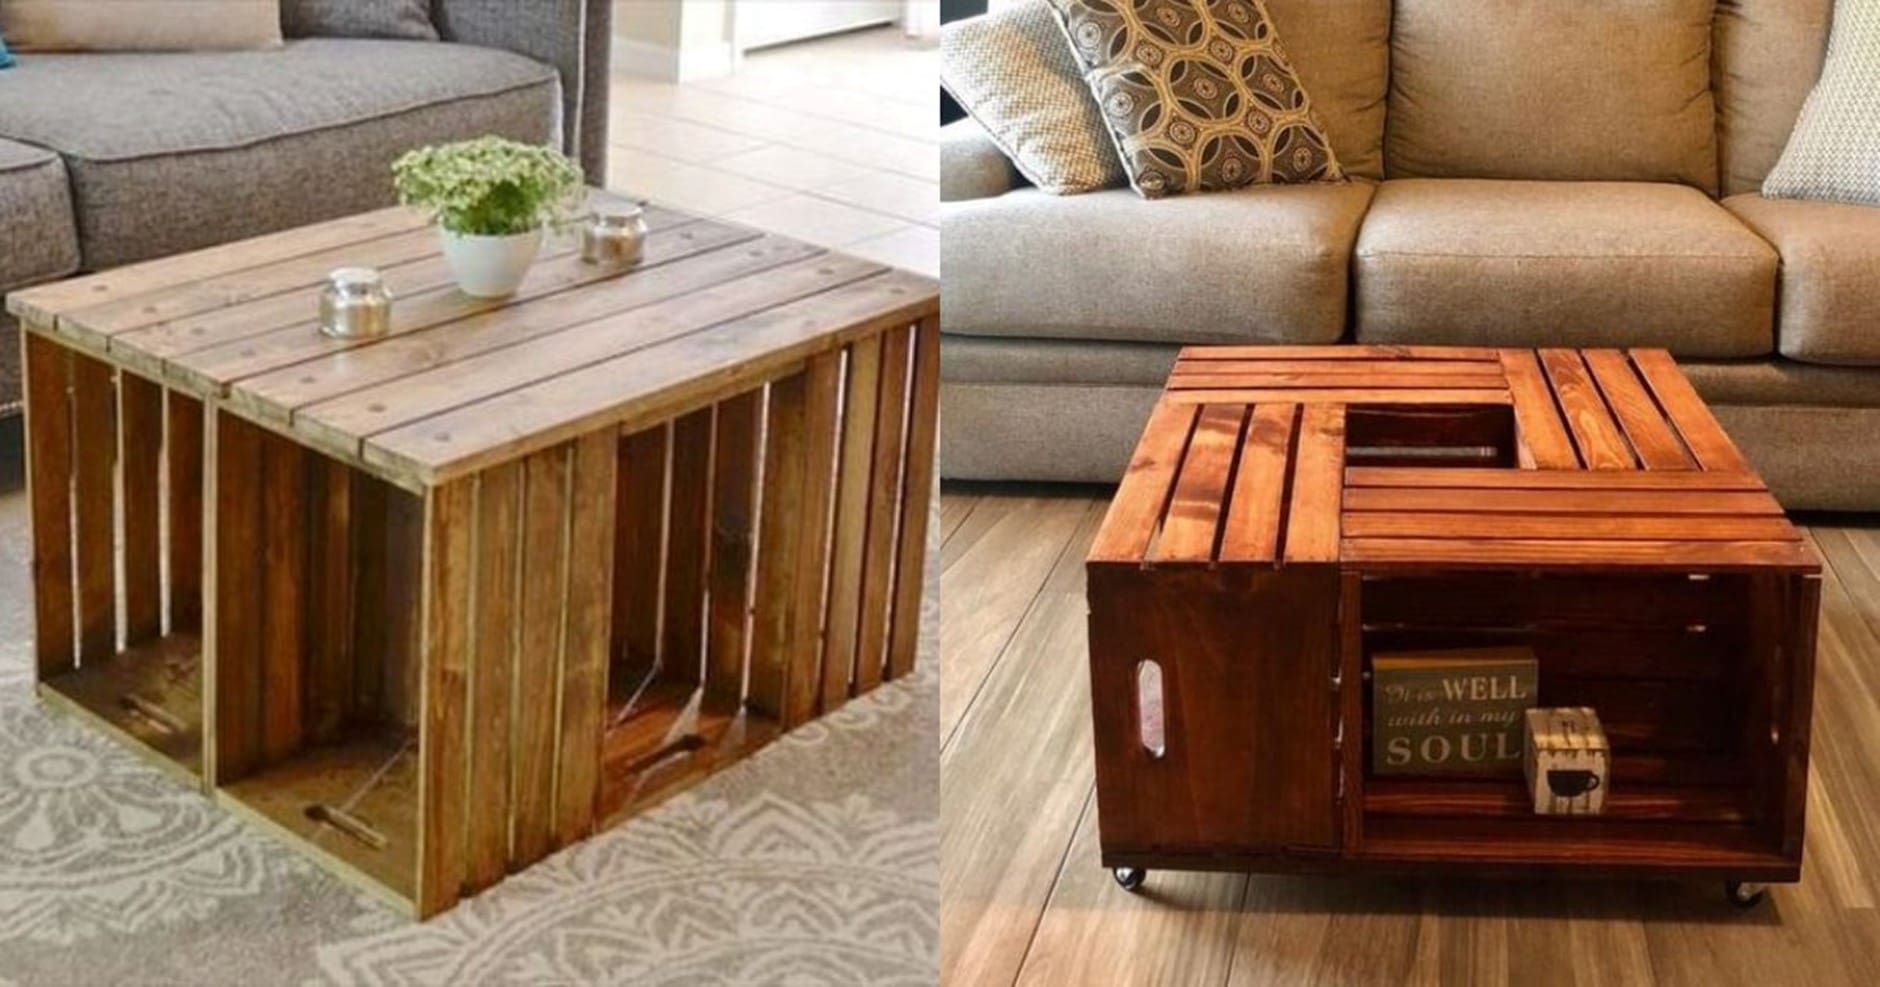 wooden crate table